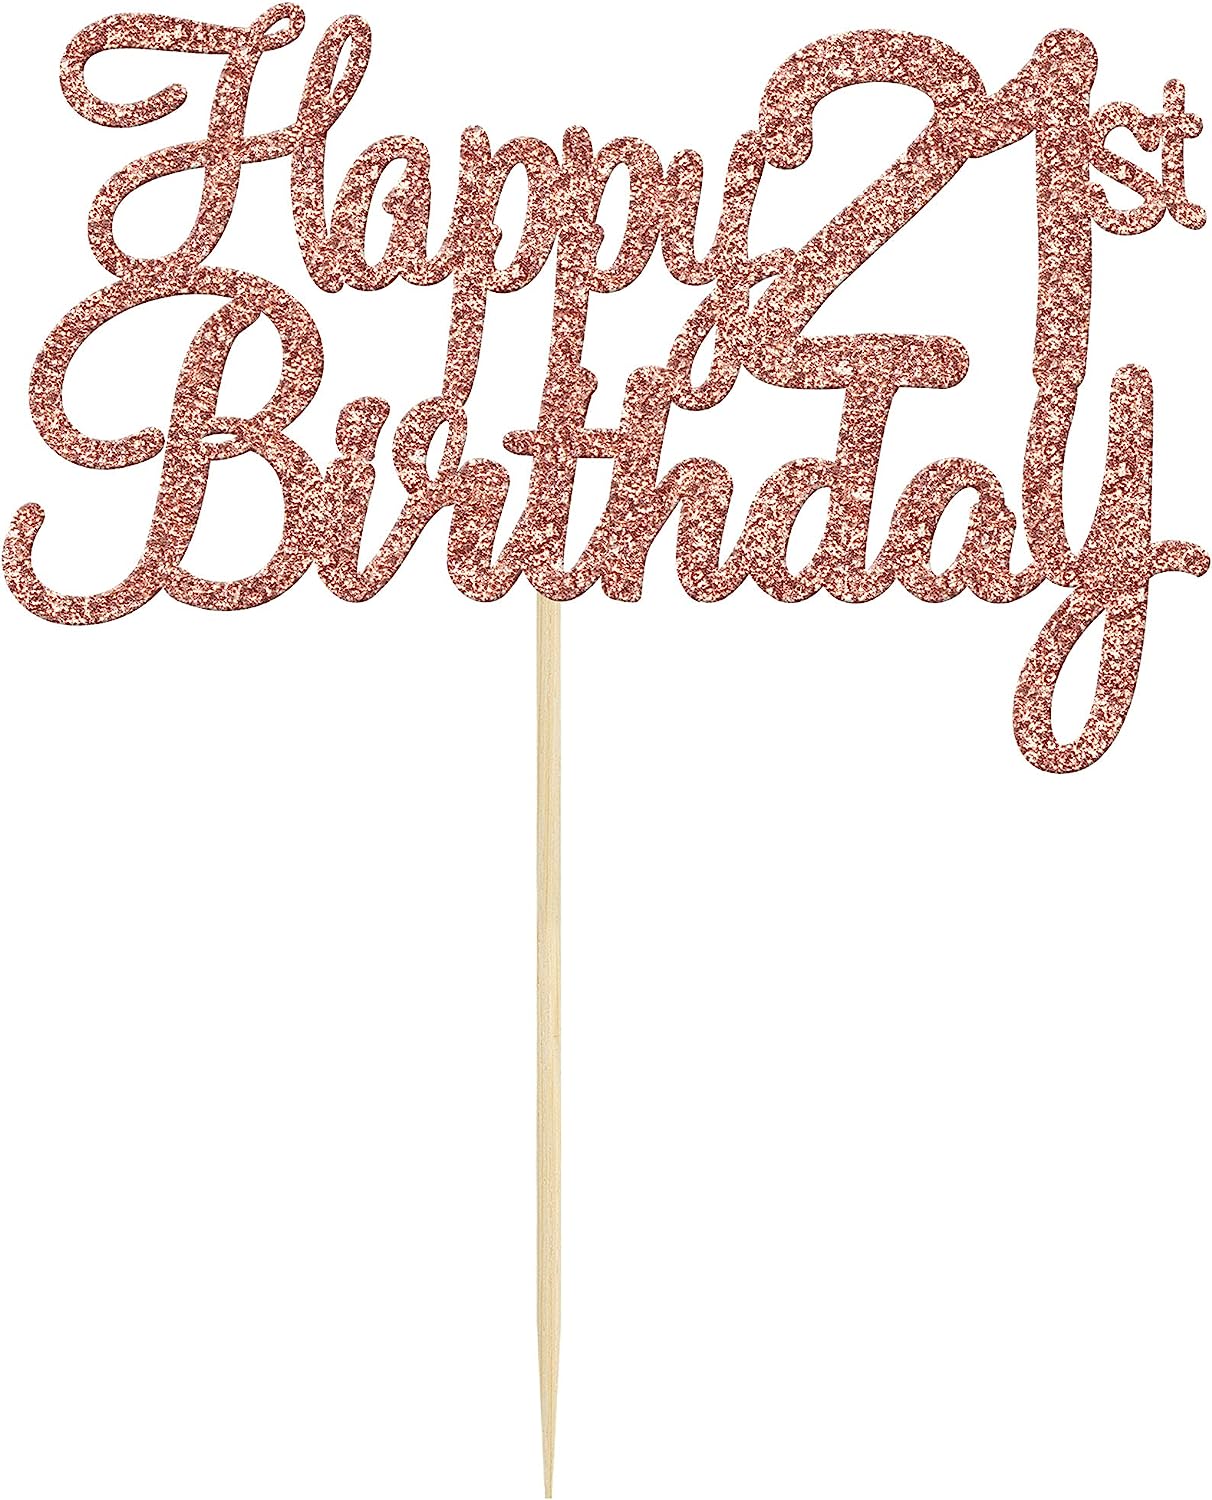 XYDZ 10 Pack Happy 21st Birthday Decoration Rose Gold Cake Topper RRP 7.99 CLEARANCE XL 5.99